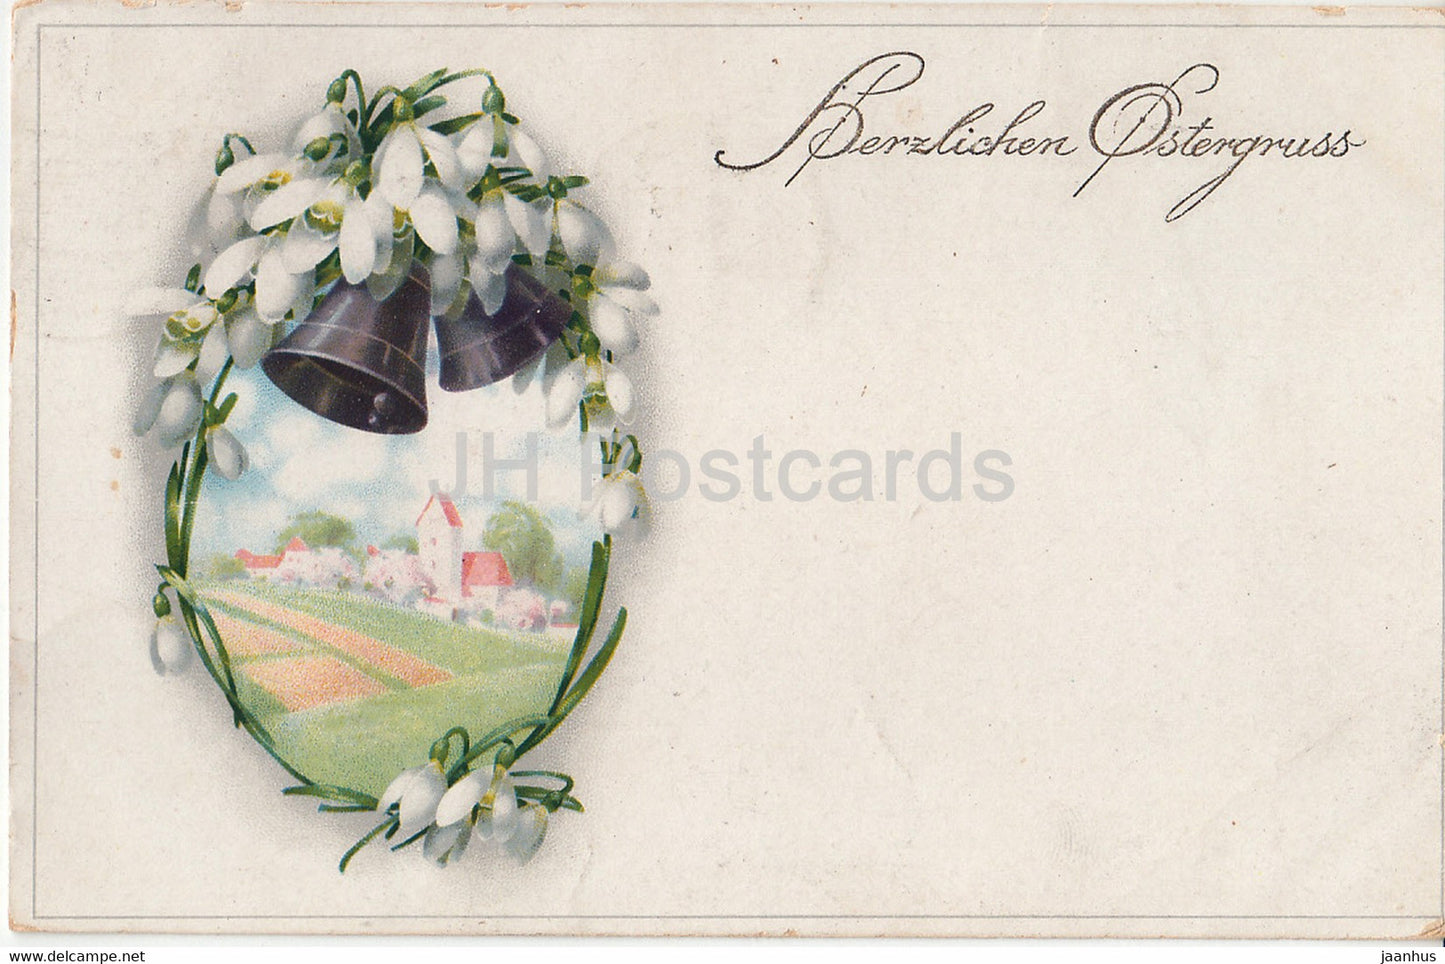 Easter Greeting Card - Herzlichen Ostergruss - bells - flowers - MB 2524 - old postcard - 1922 - Germany - used - JH Postcards